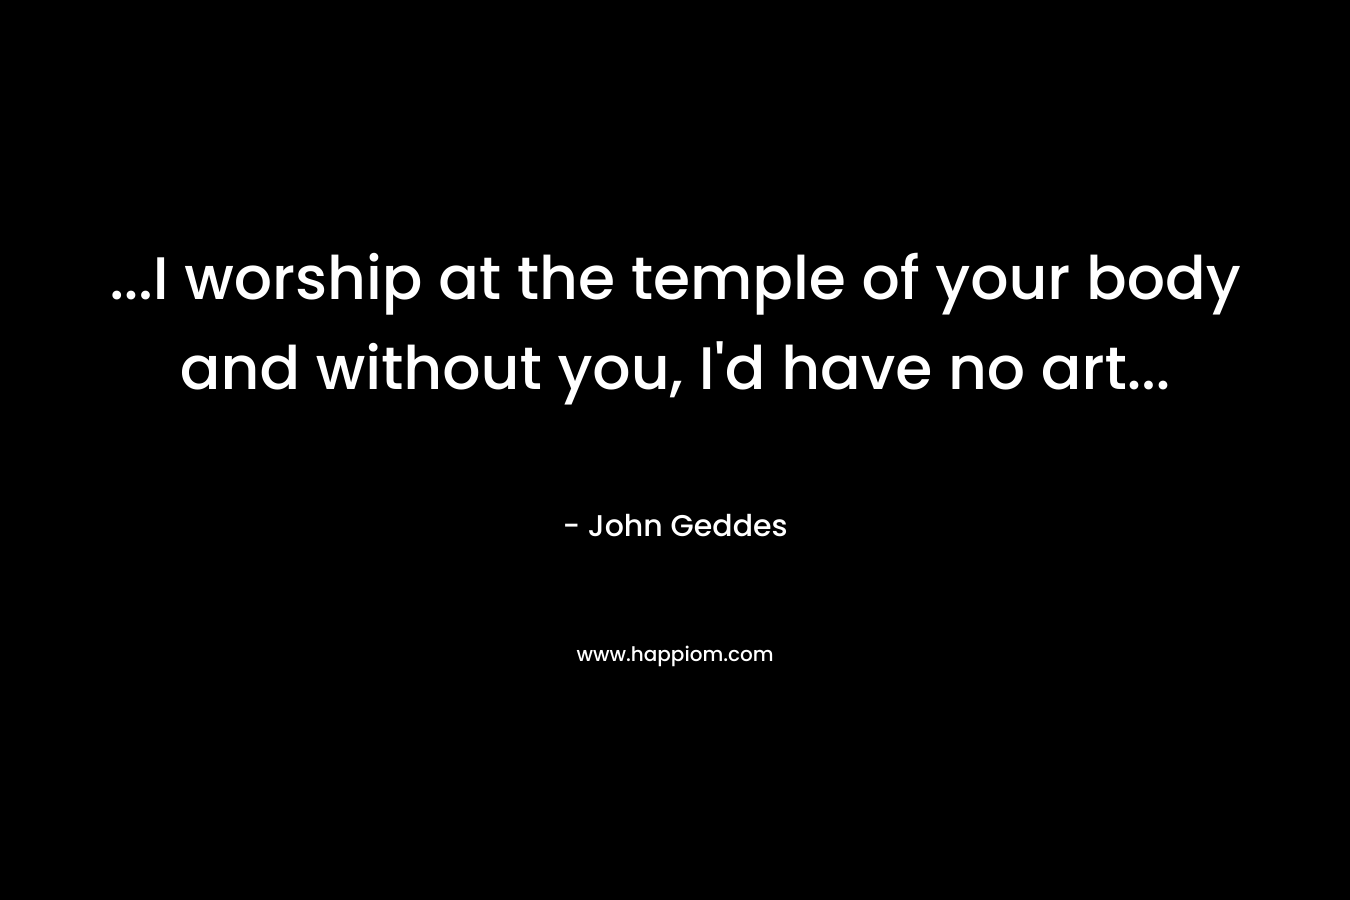 ...I worship at the temple of your body and without you, I'd have no art...